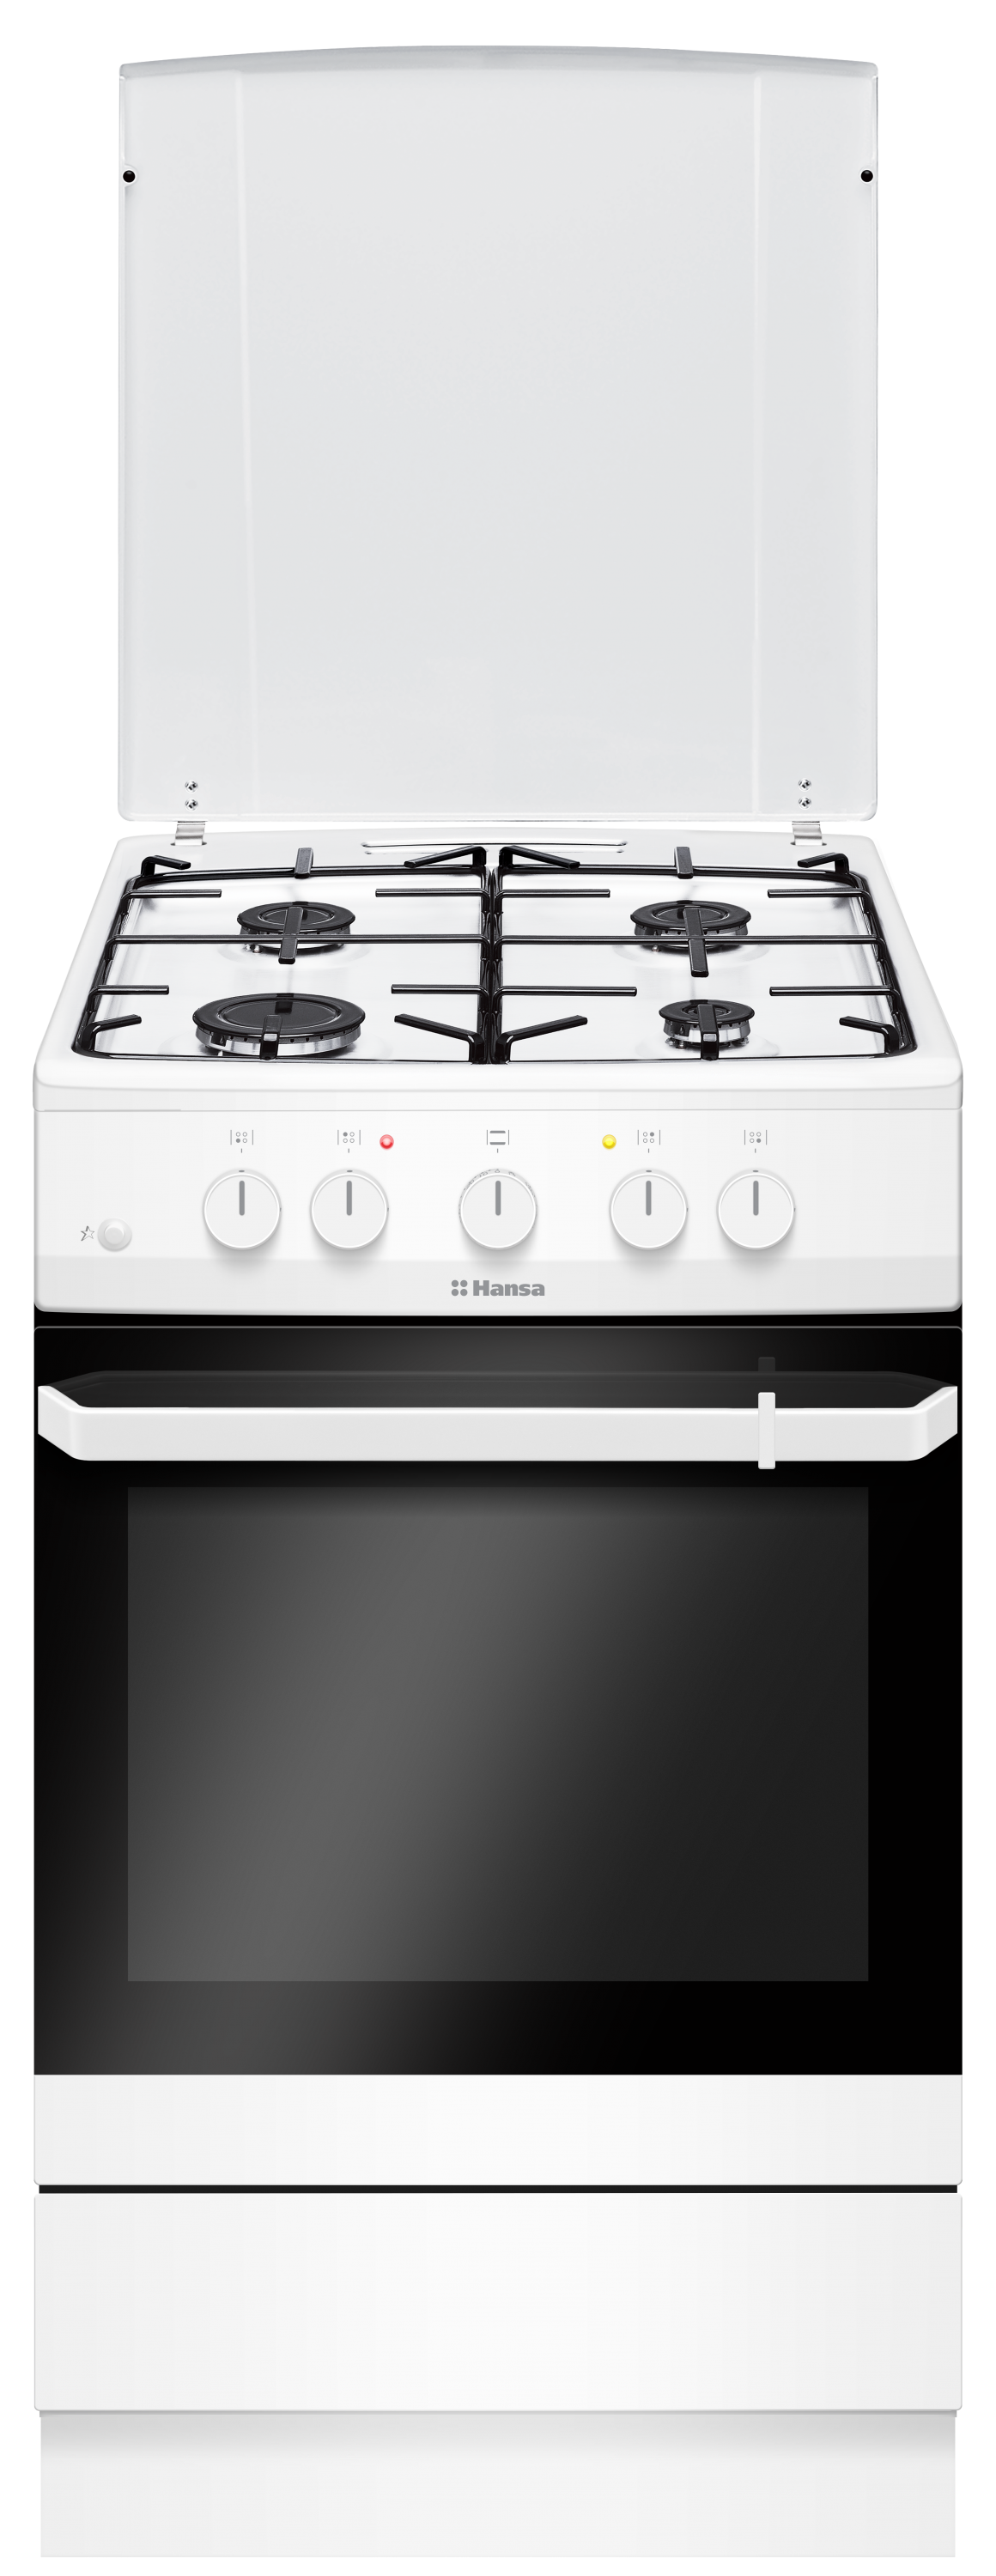 Freestanding cooker with gas hob